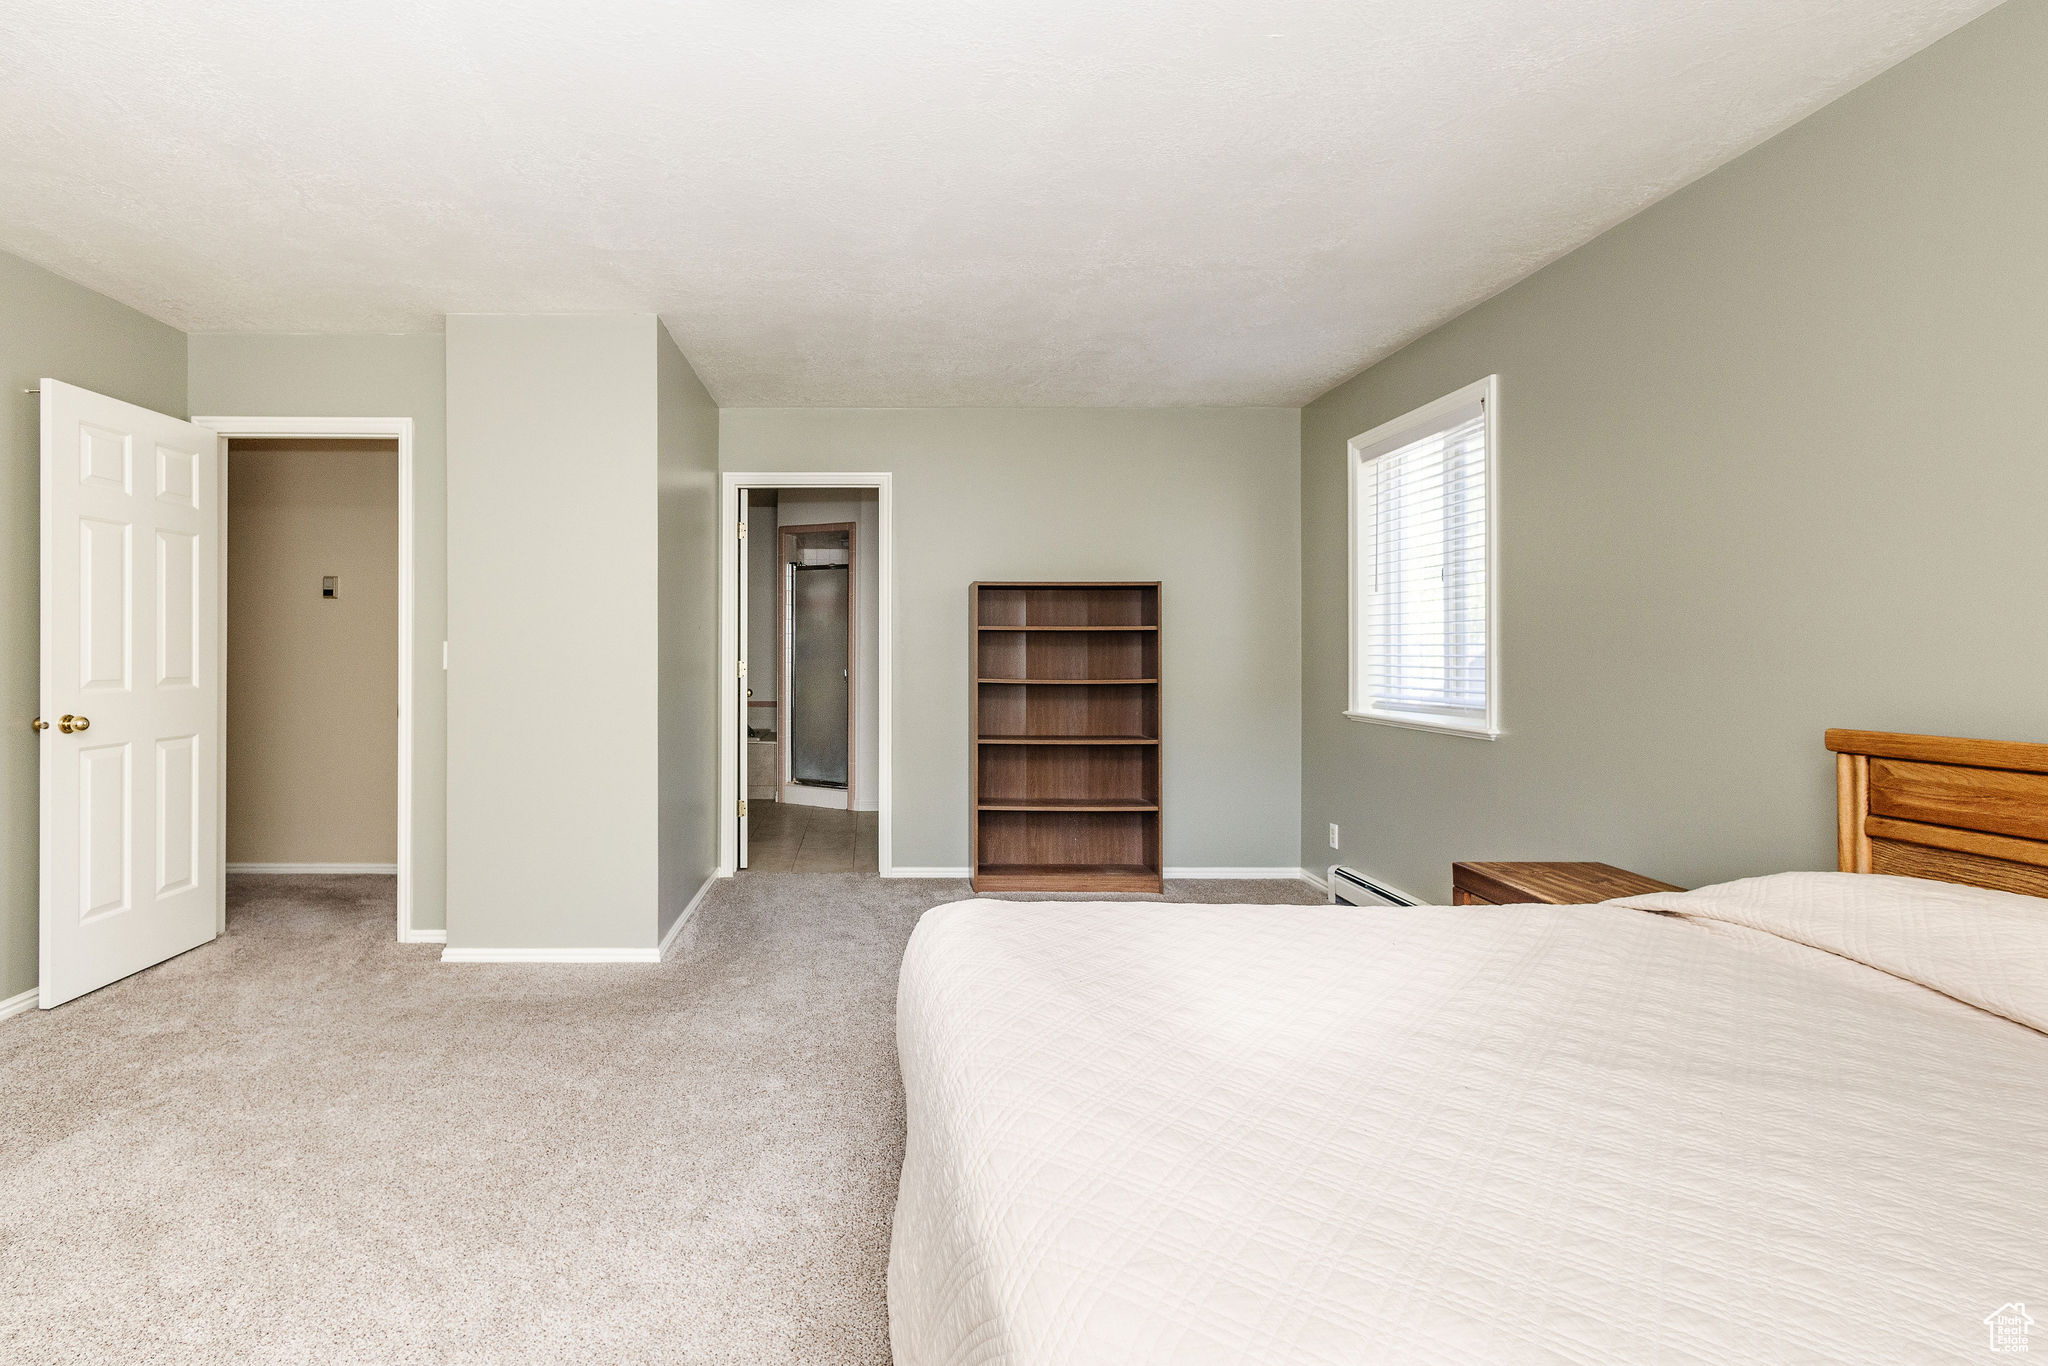 Bedroom featuring light carpet and baseboard heating